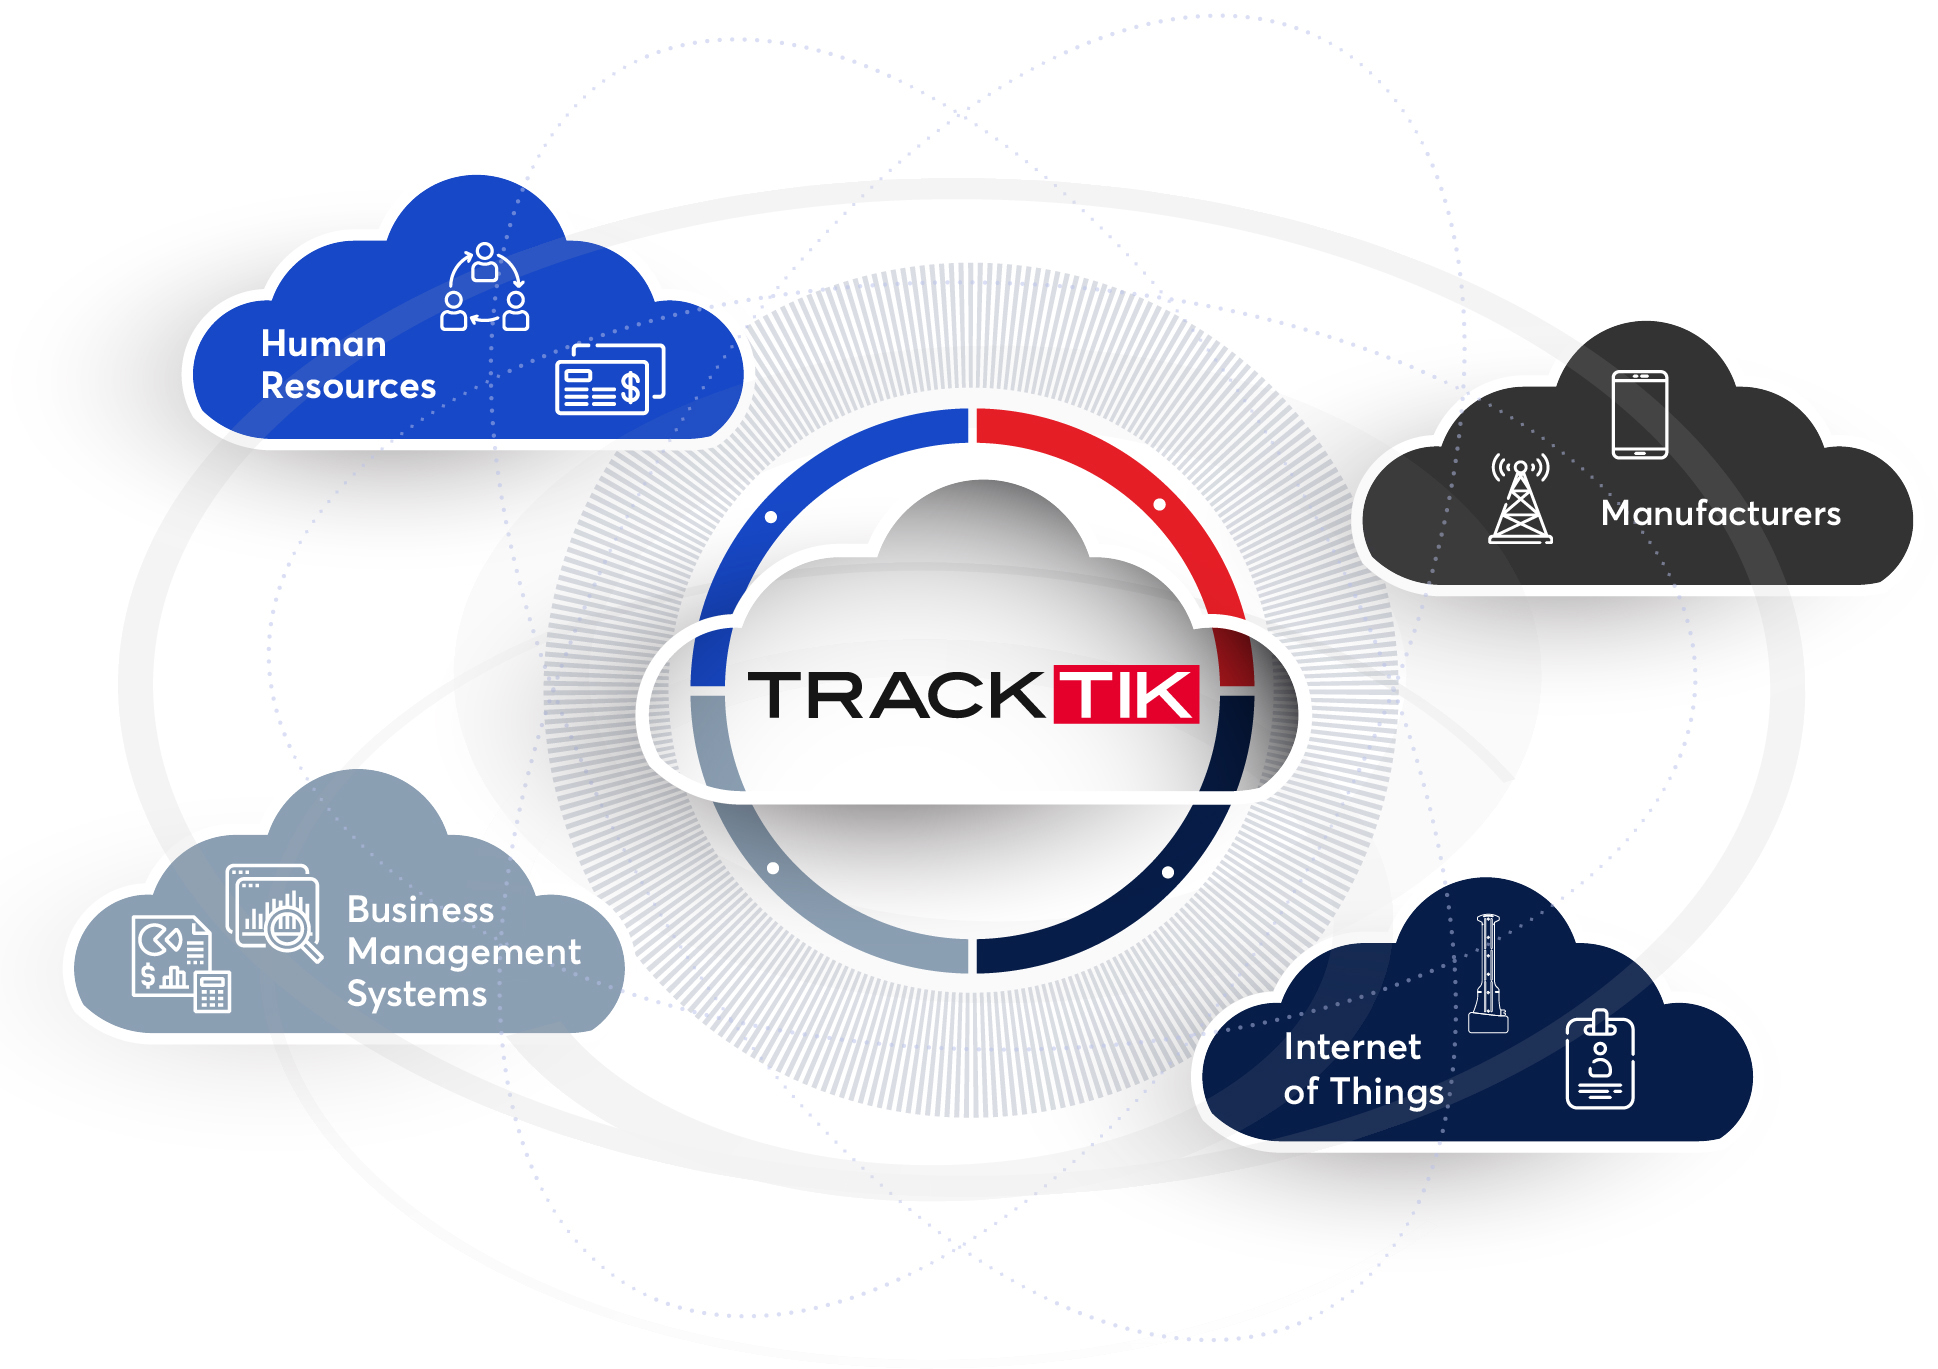 Find a TrackTik Partner that is right for you